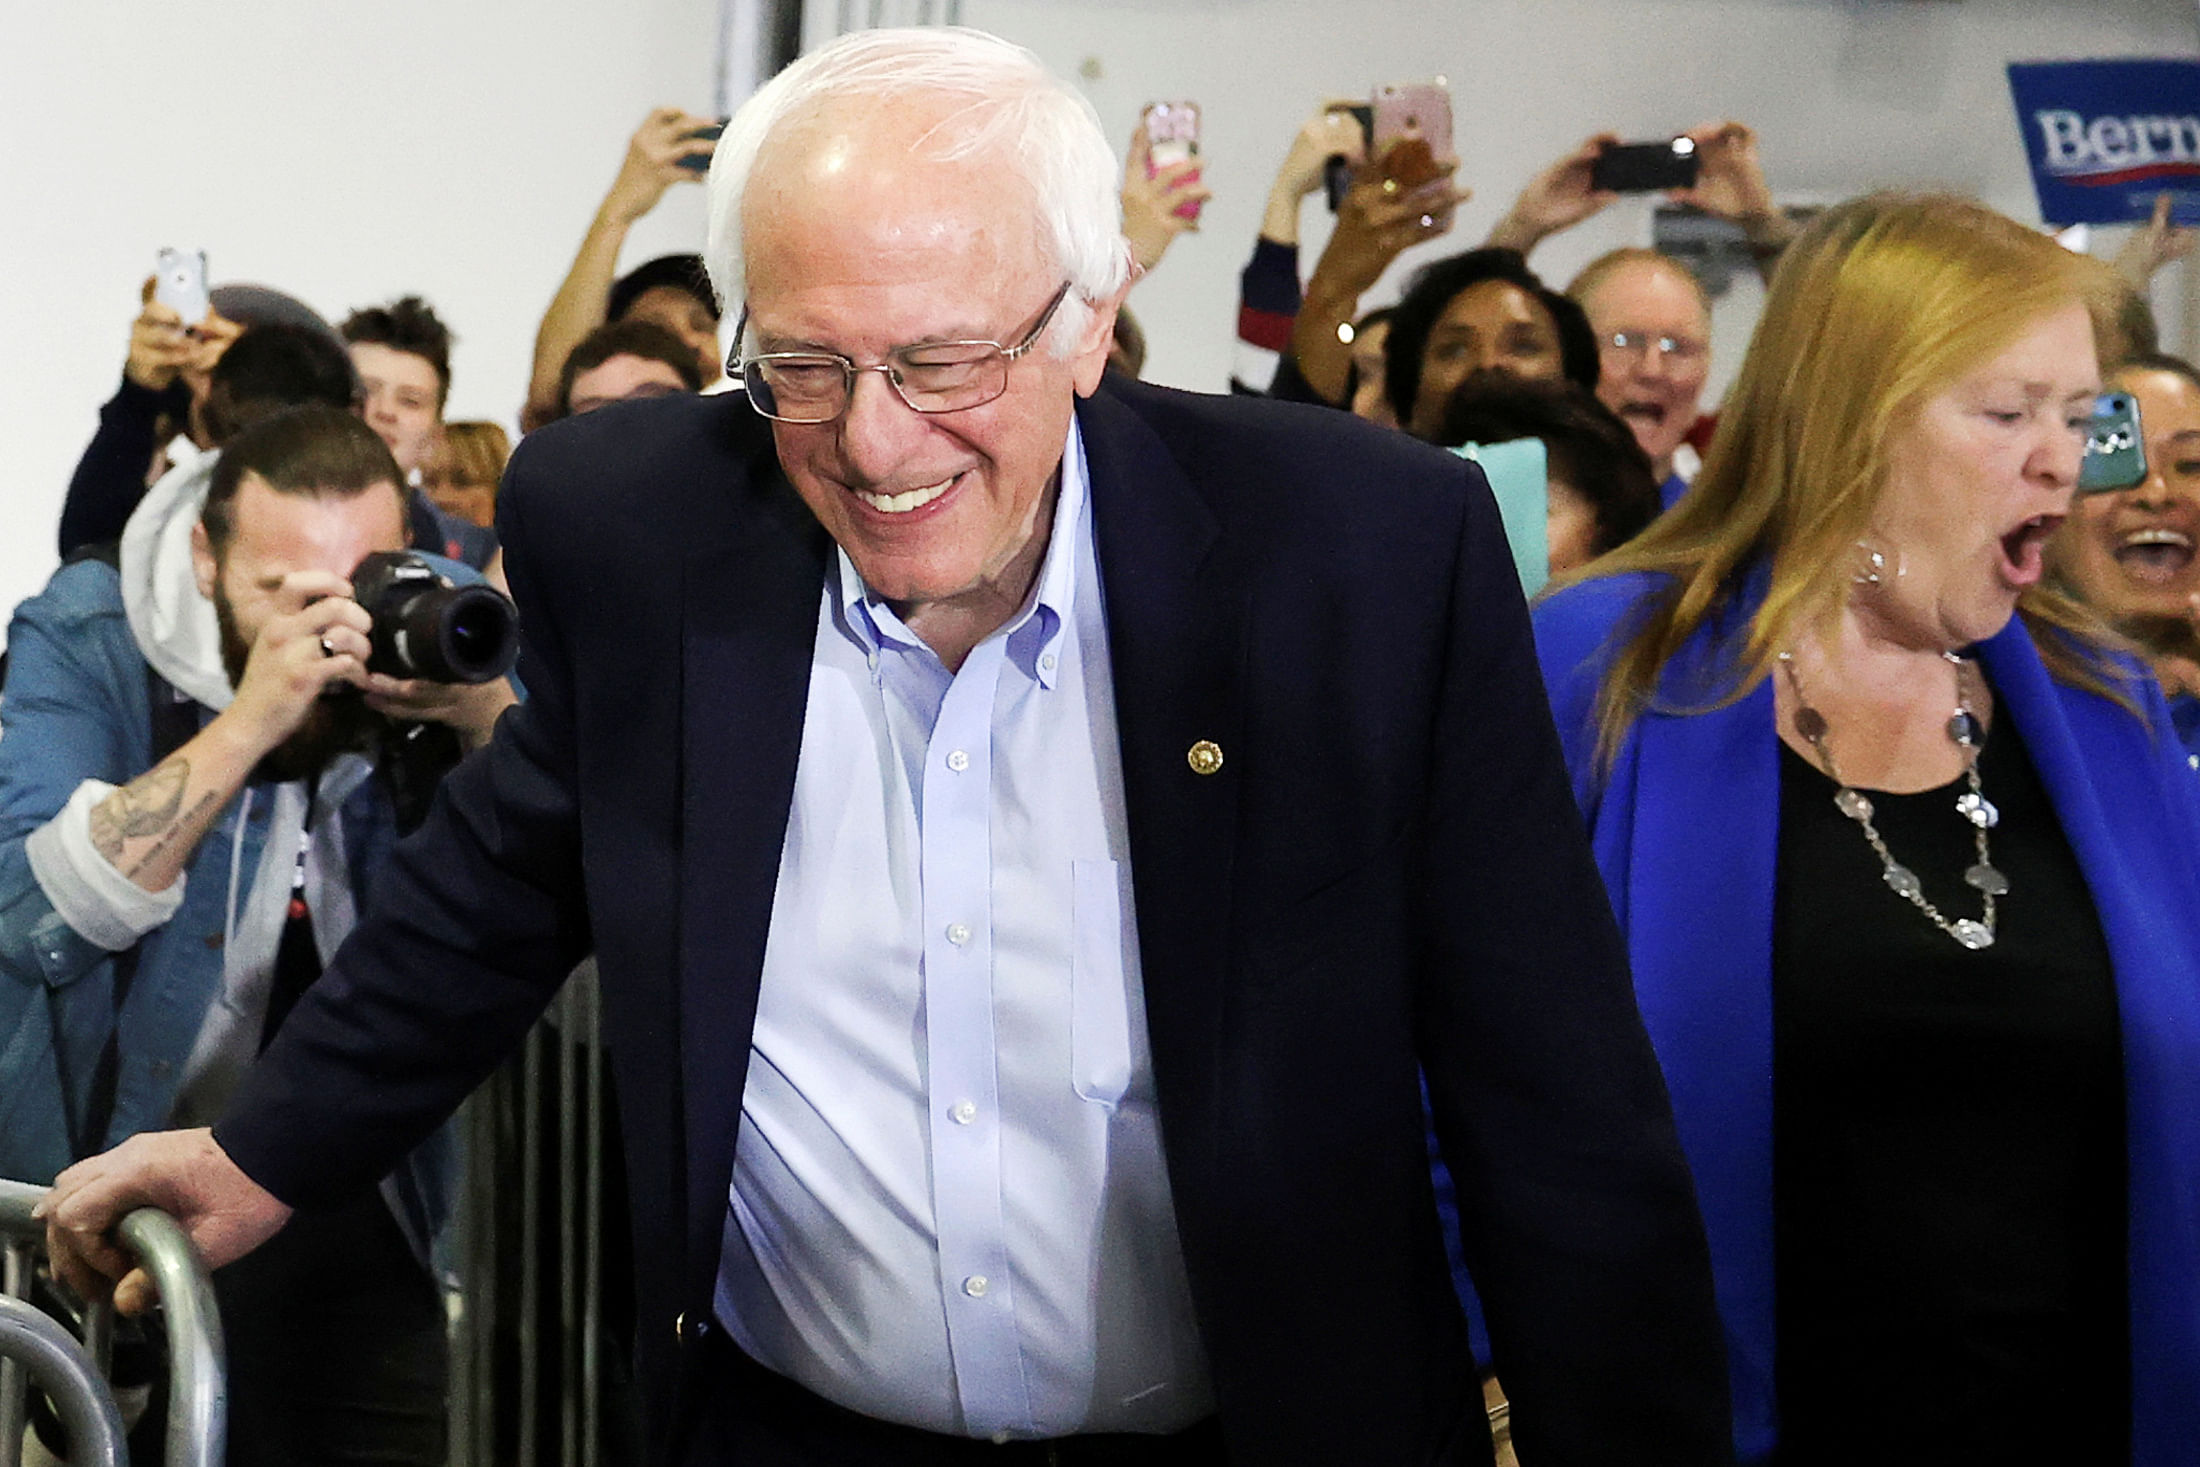 "You can't win 'em all," Sanders told a crowd of 3,500 in a college gym at a rally in Virginia Beach, Virginia, on Saturday night. (Credit: Reuters Photo)